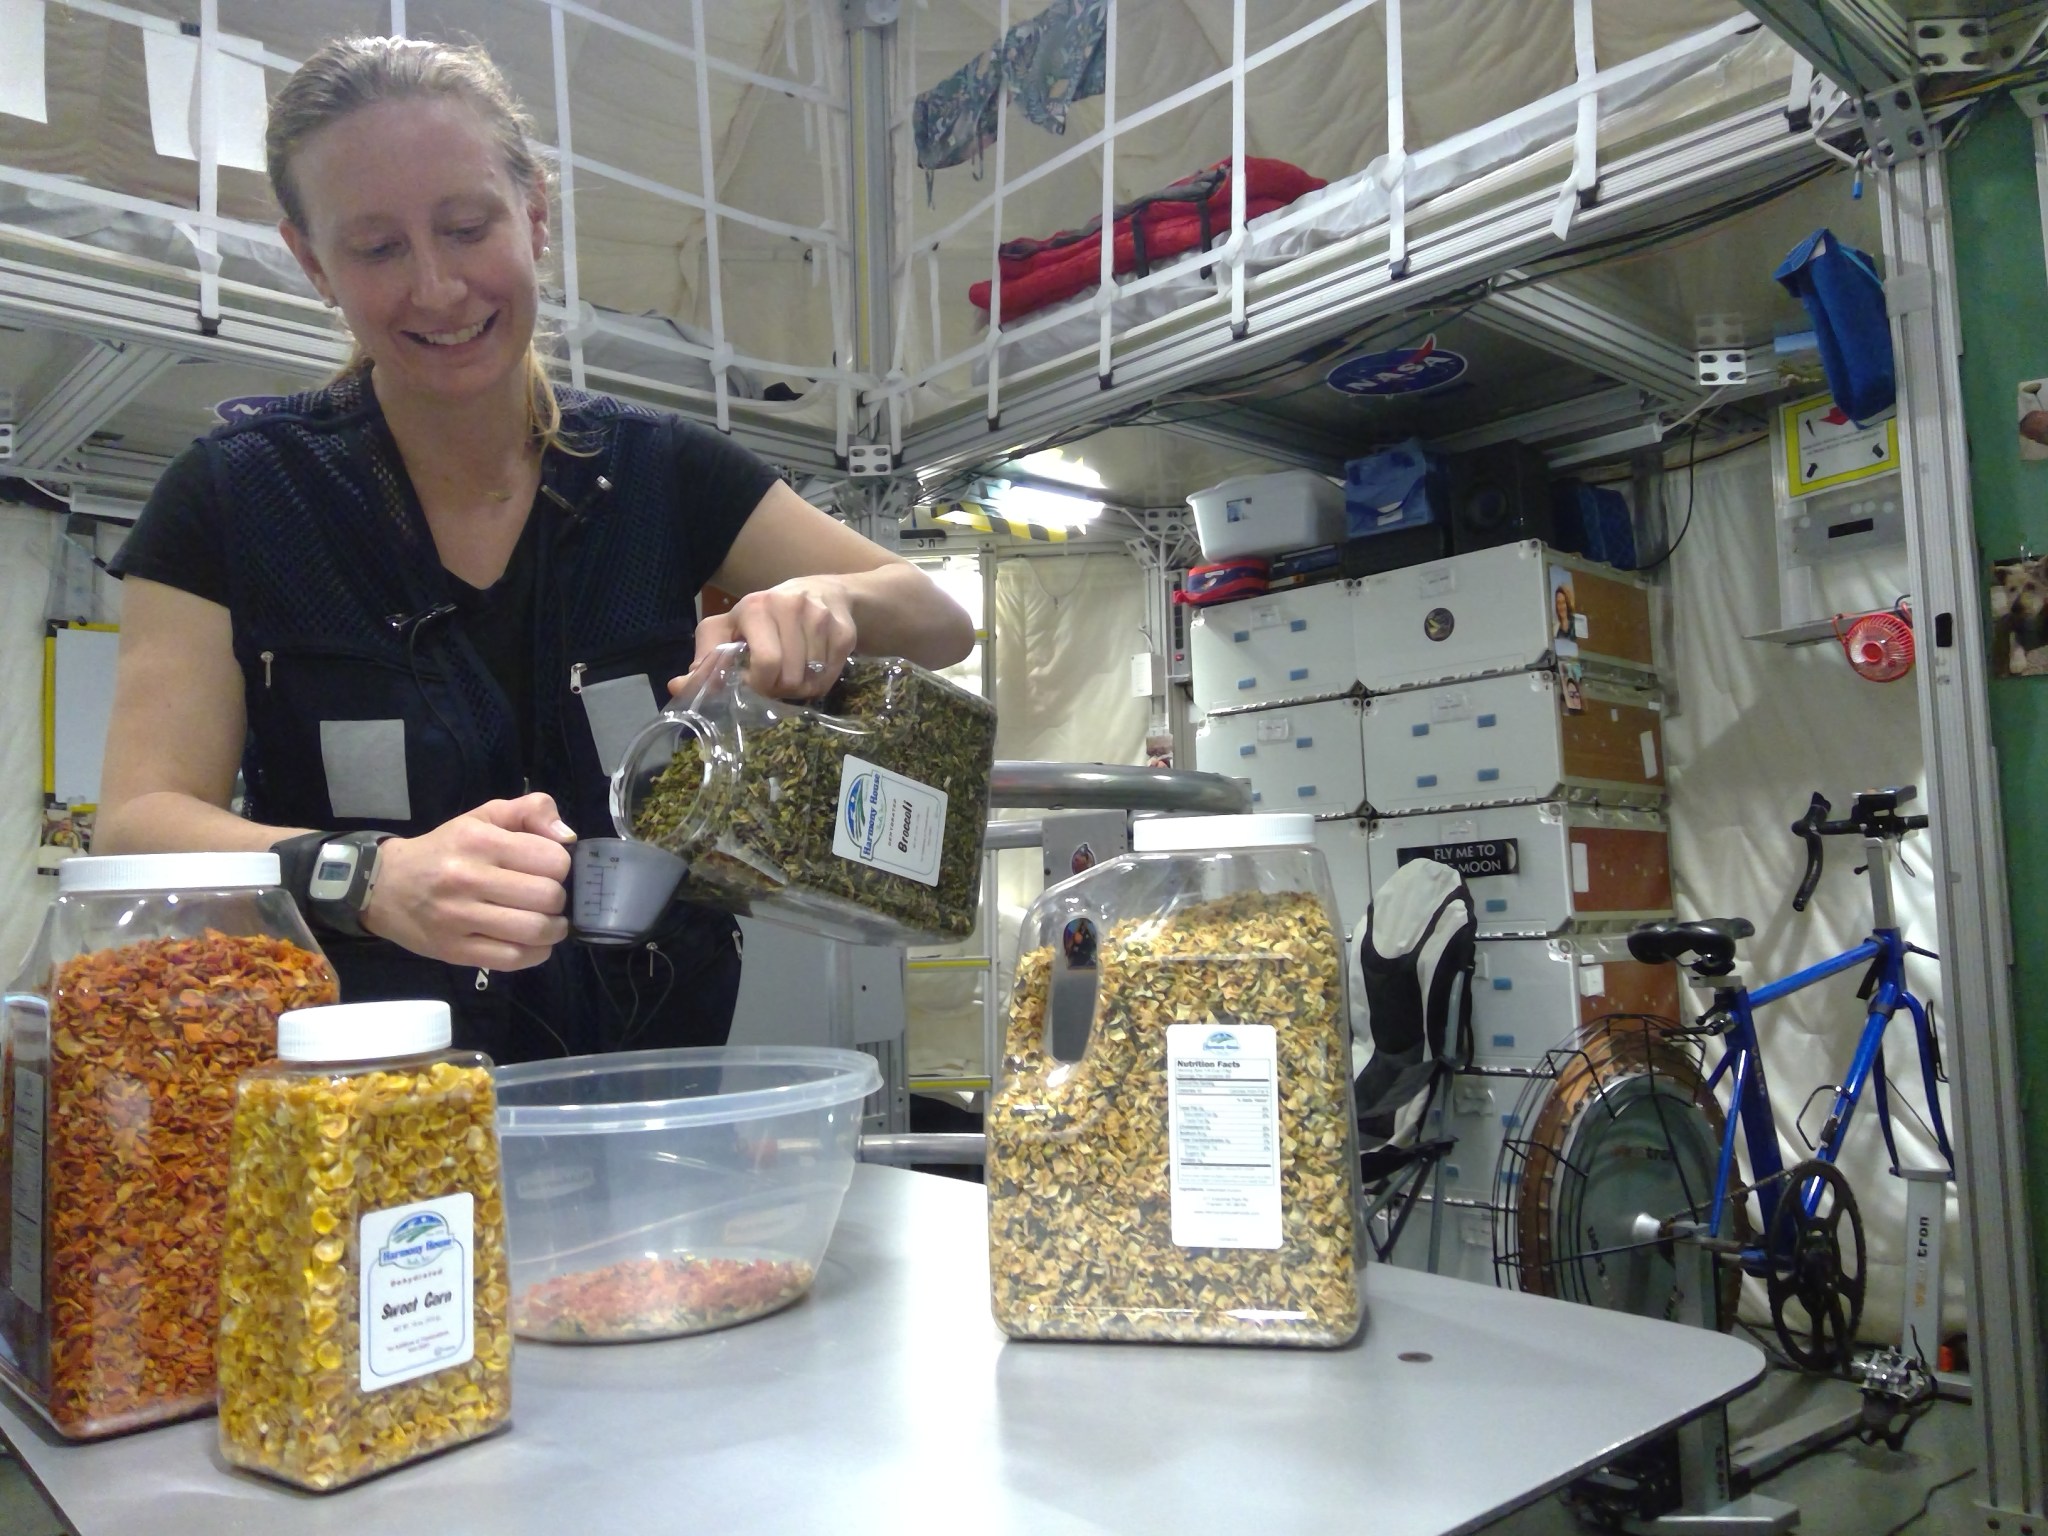 A woman in a black uniform pours dried vegetables from a large container into a measuring cup at a table. The table has multiple jars of dried vegetables, and the background features a habitat with storage boxes, a blue exercise bike, and various equipment.